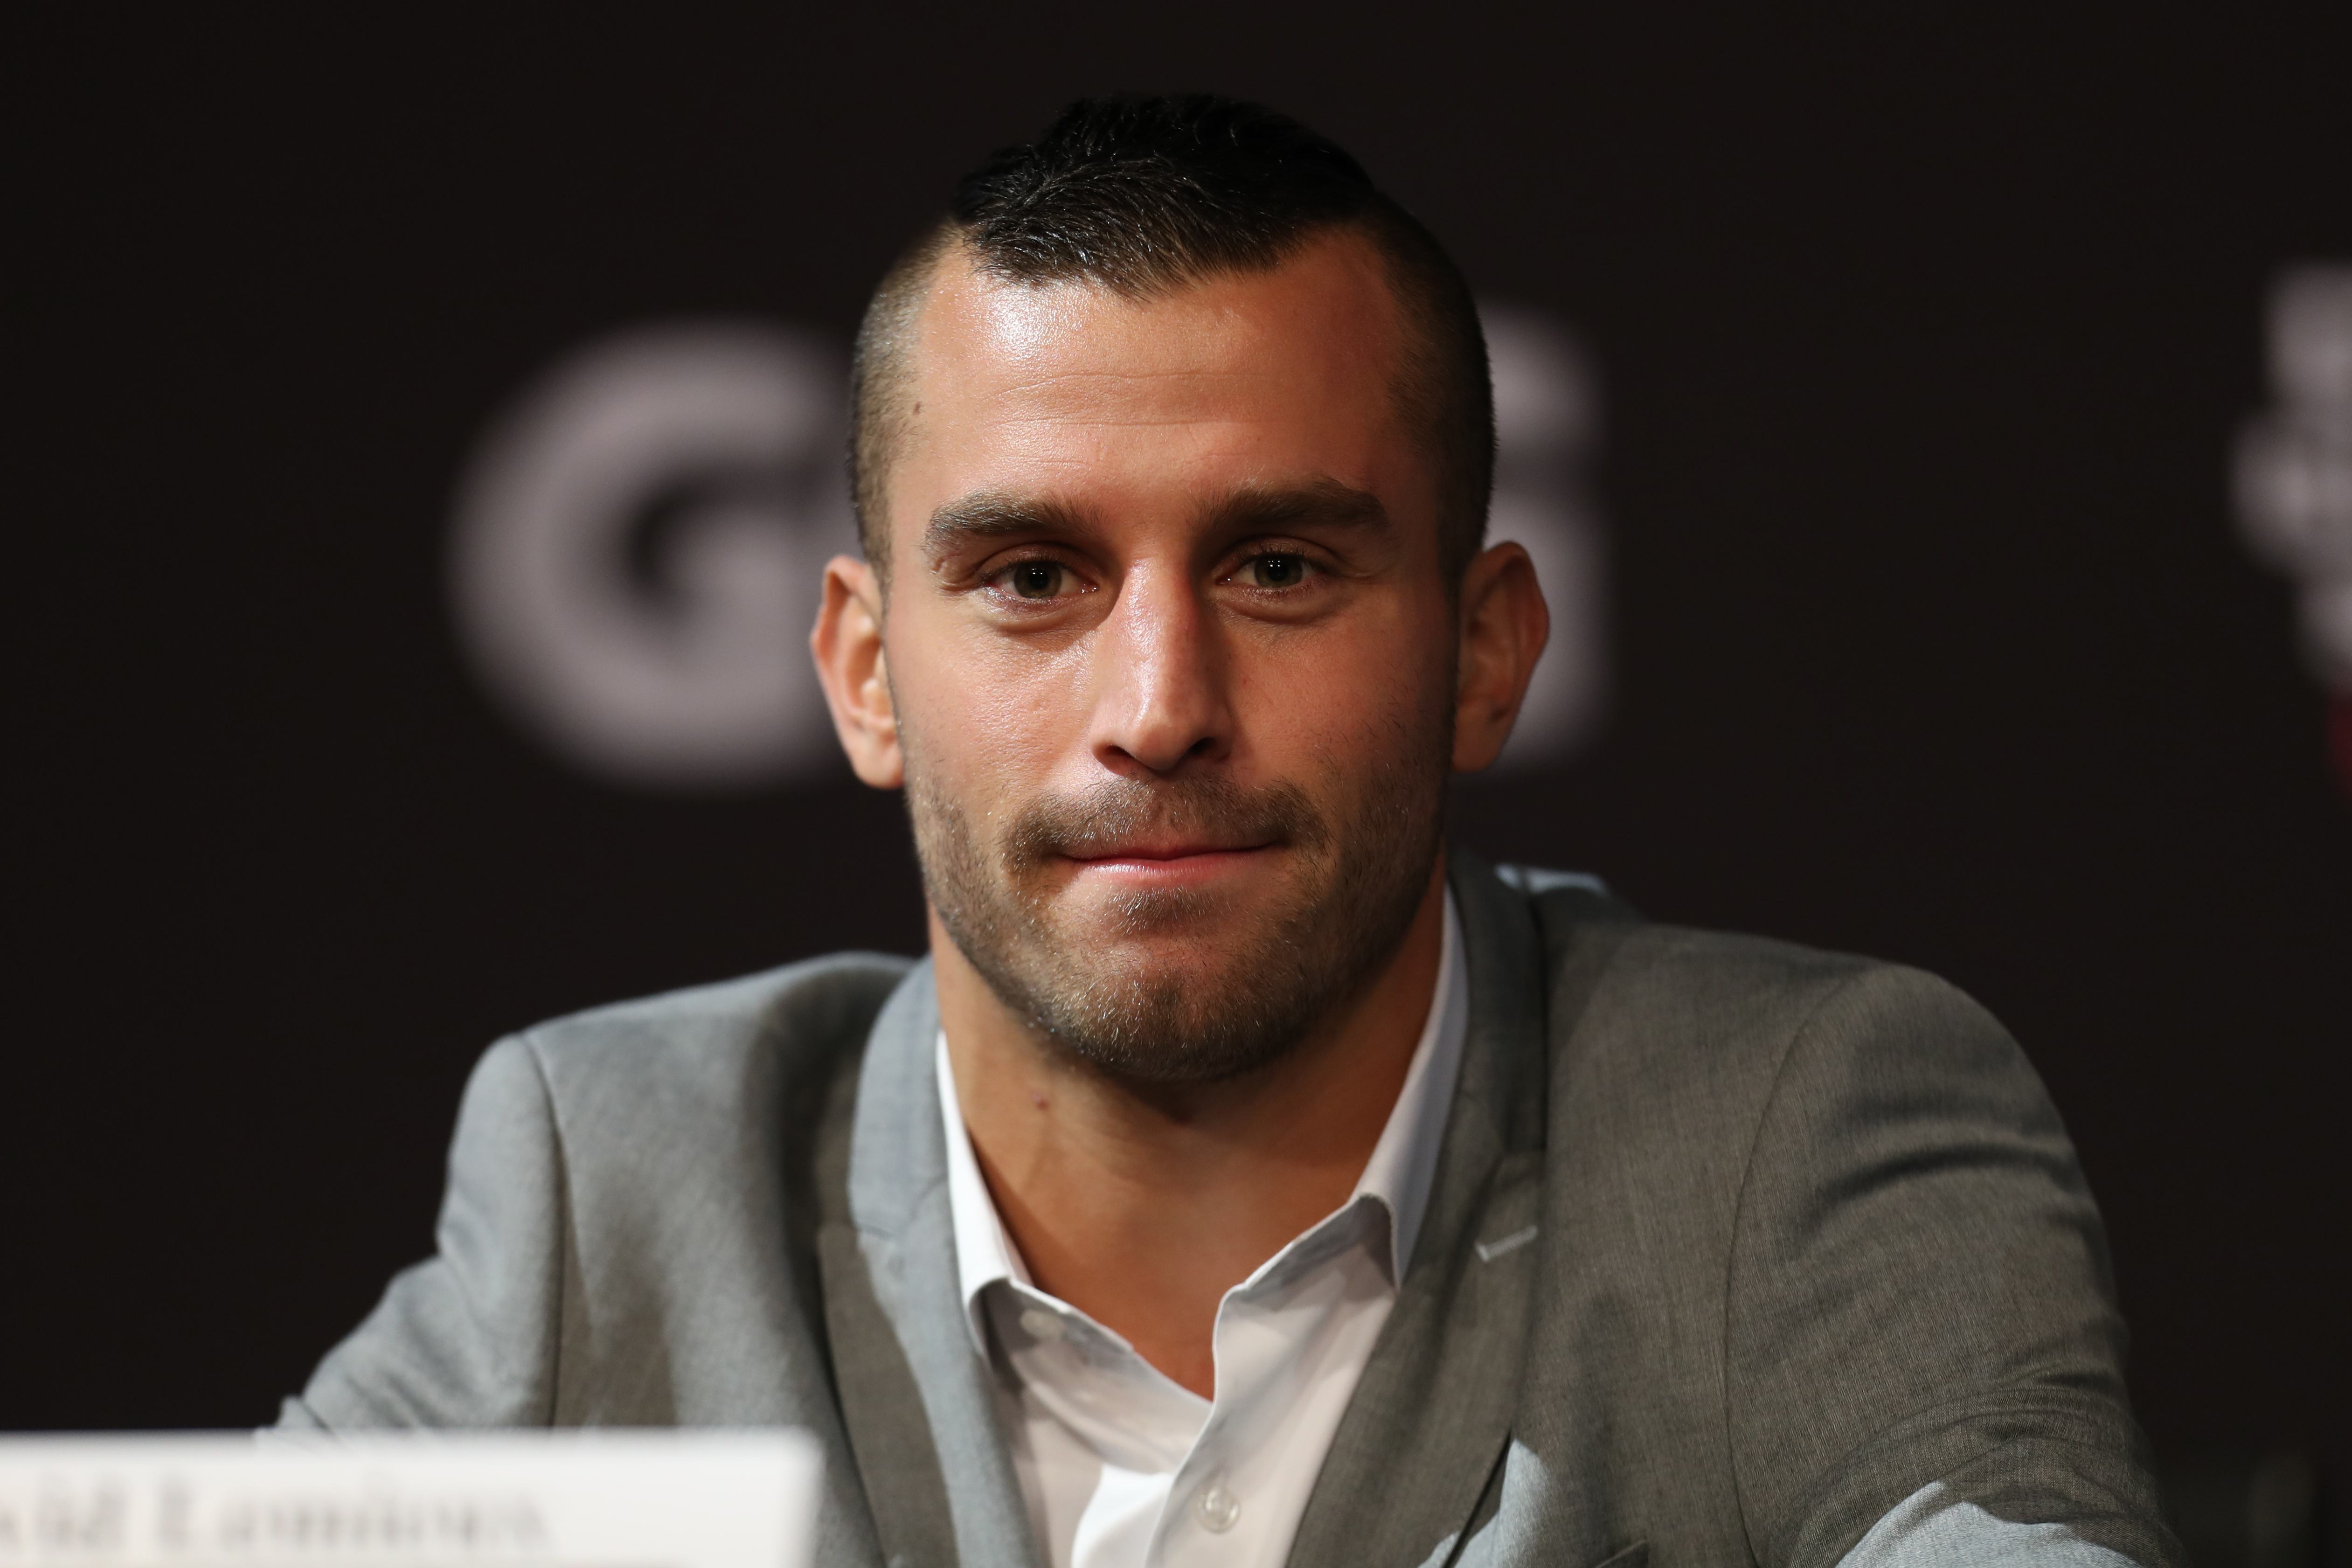 David Lemieux has announced his retirement from boxing